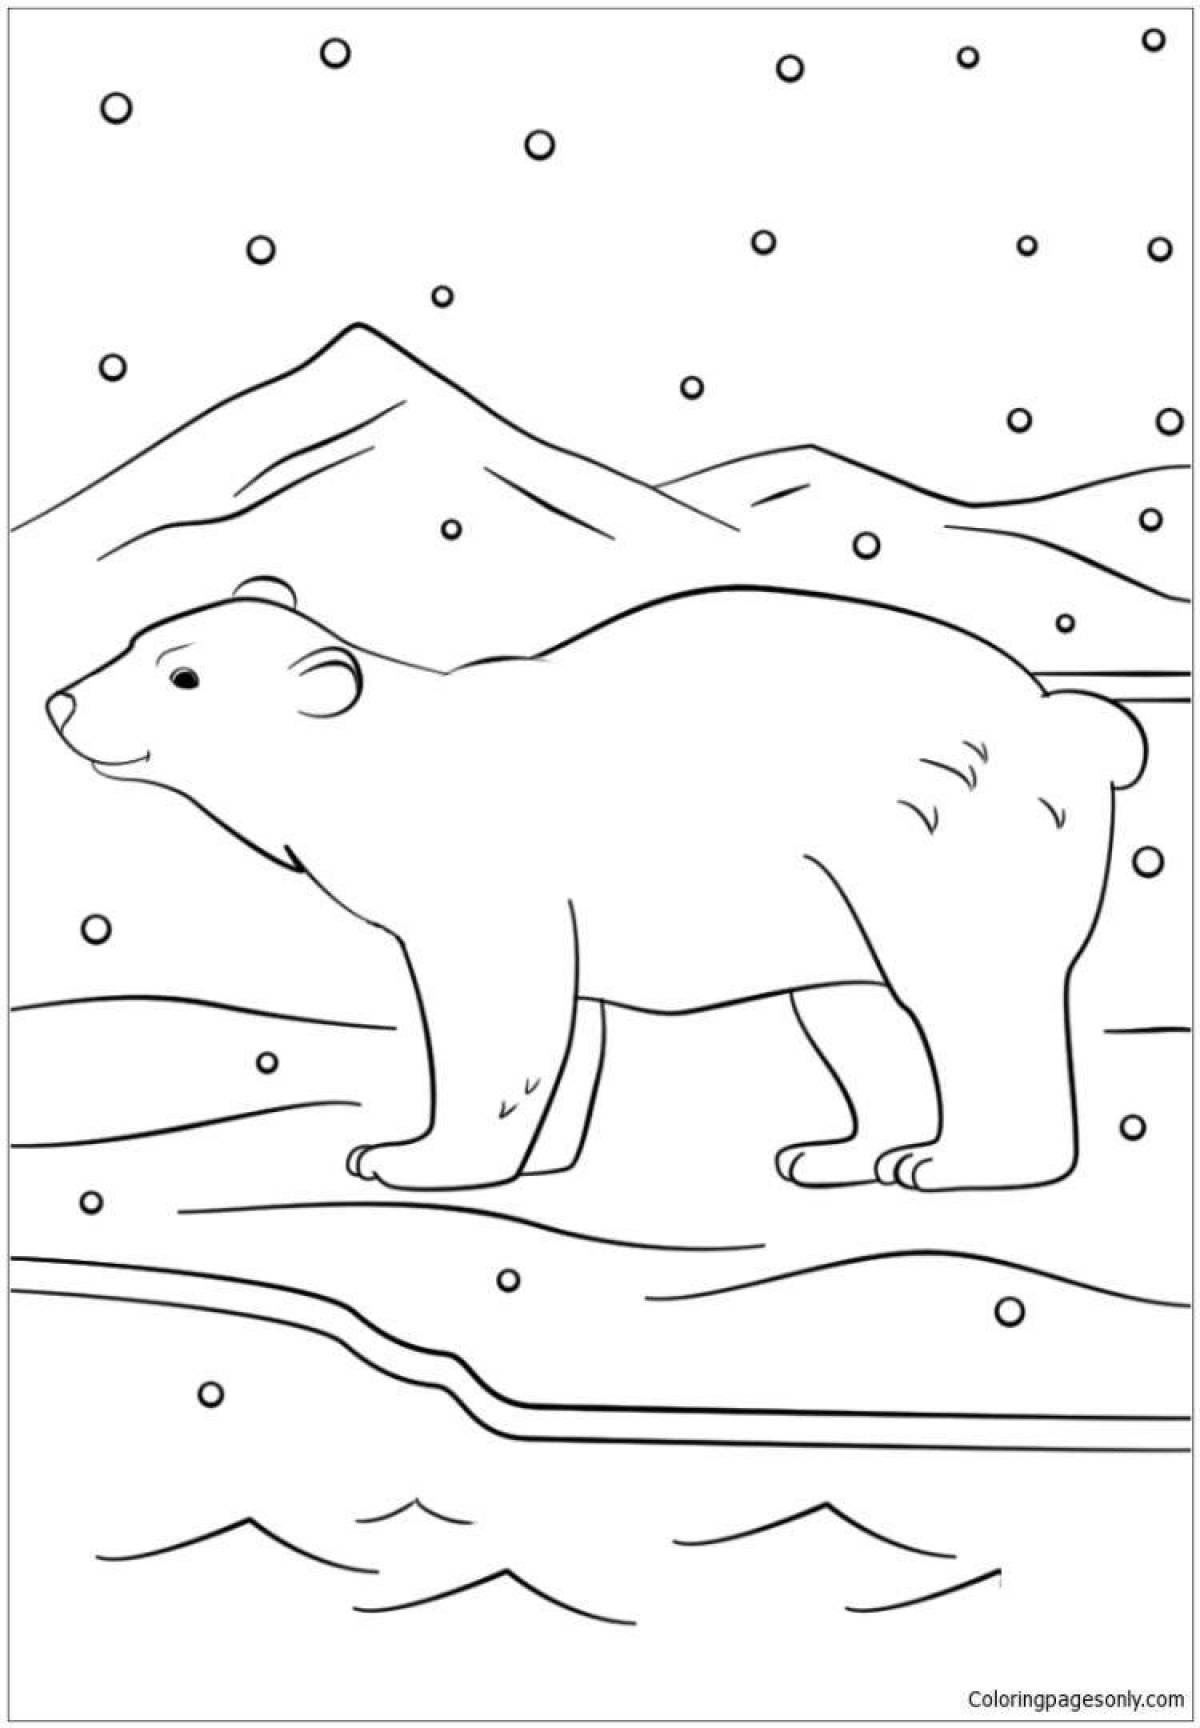 Merry bear in the north coloring book